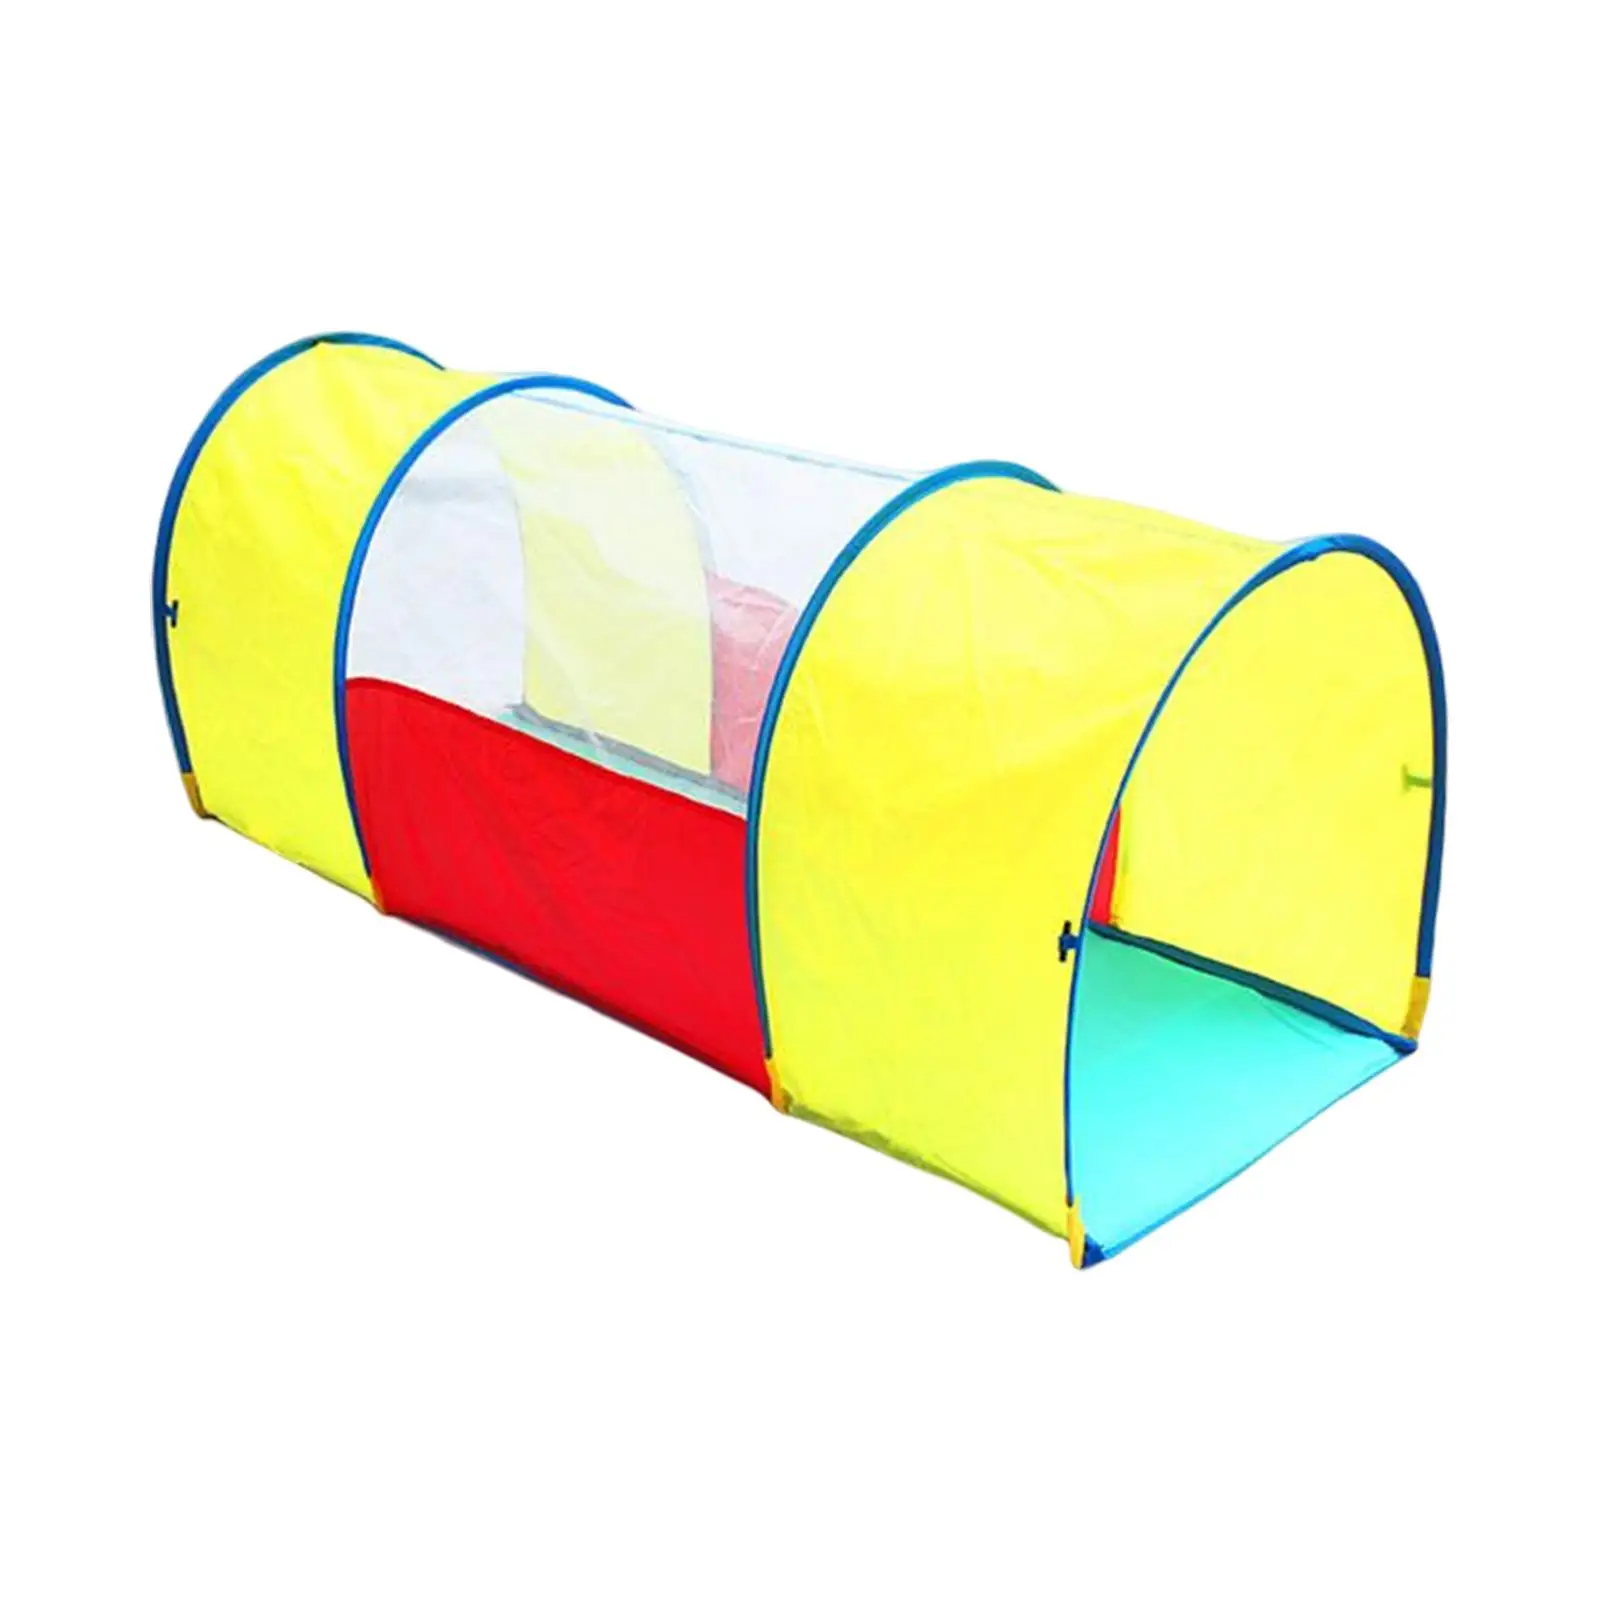 Portable Play Tent Toy Climbing Toy Indoor Outdoor Game for Toddlers Girls